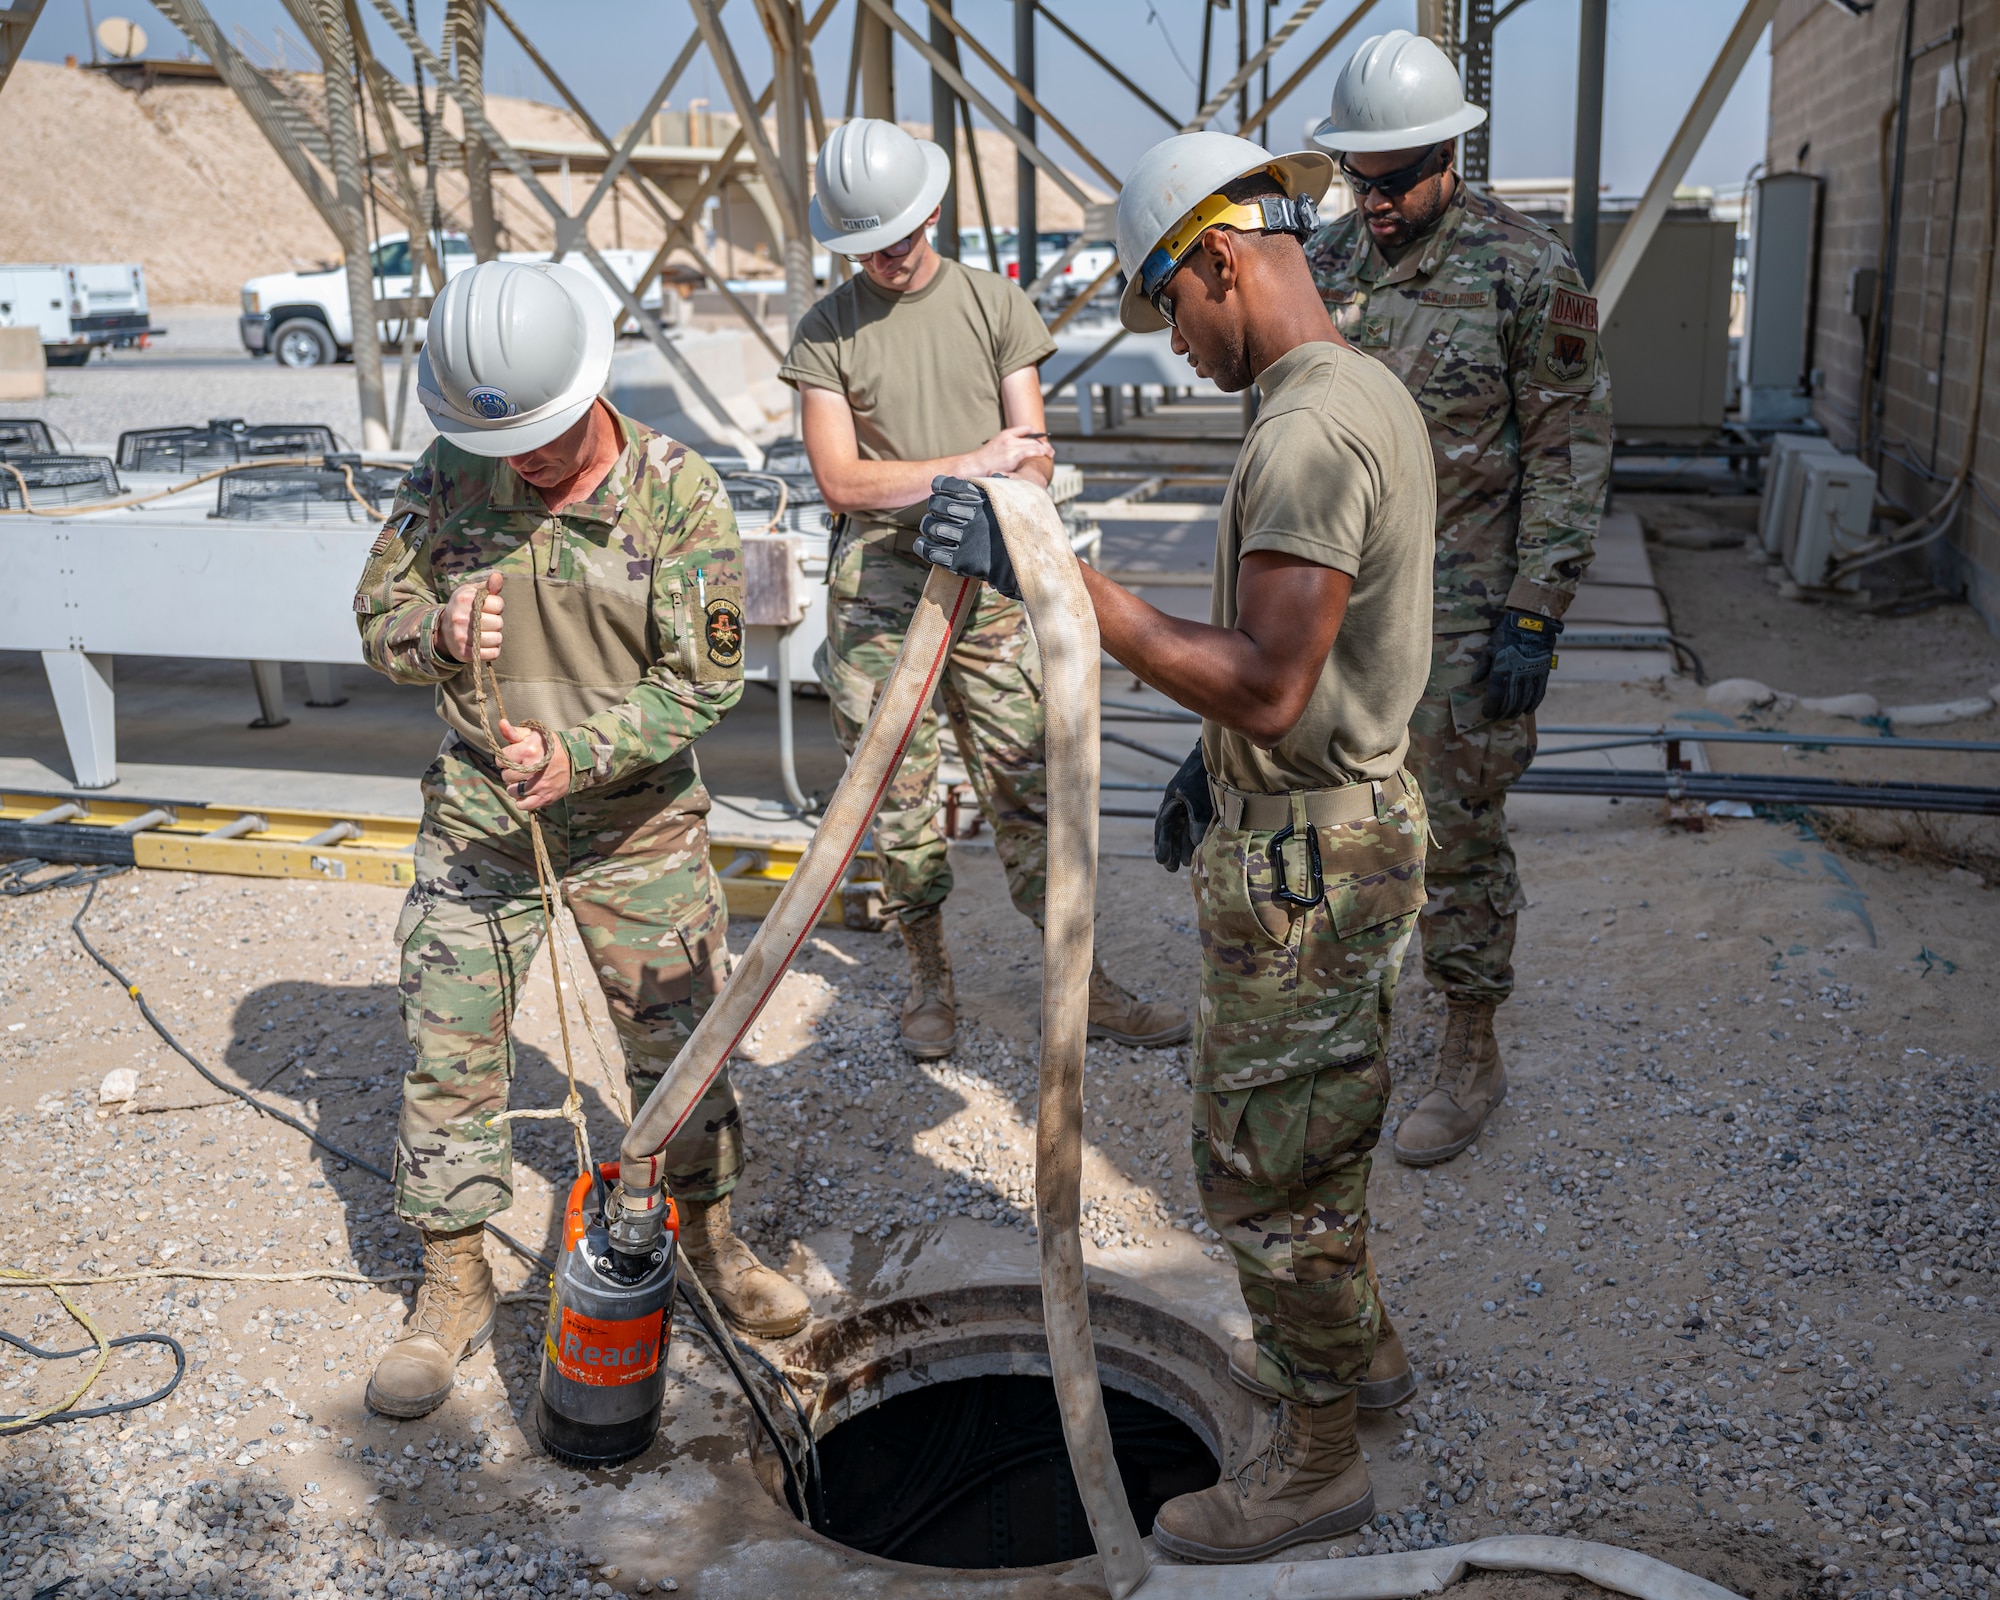 Members of the U.S. Air Forces Central, Air Force Forces A67 Engineering and Installation team assist in checking communication lines at Ali Al Salem Air Base, Kuwait, Oct. 19, 2021.